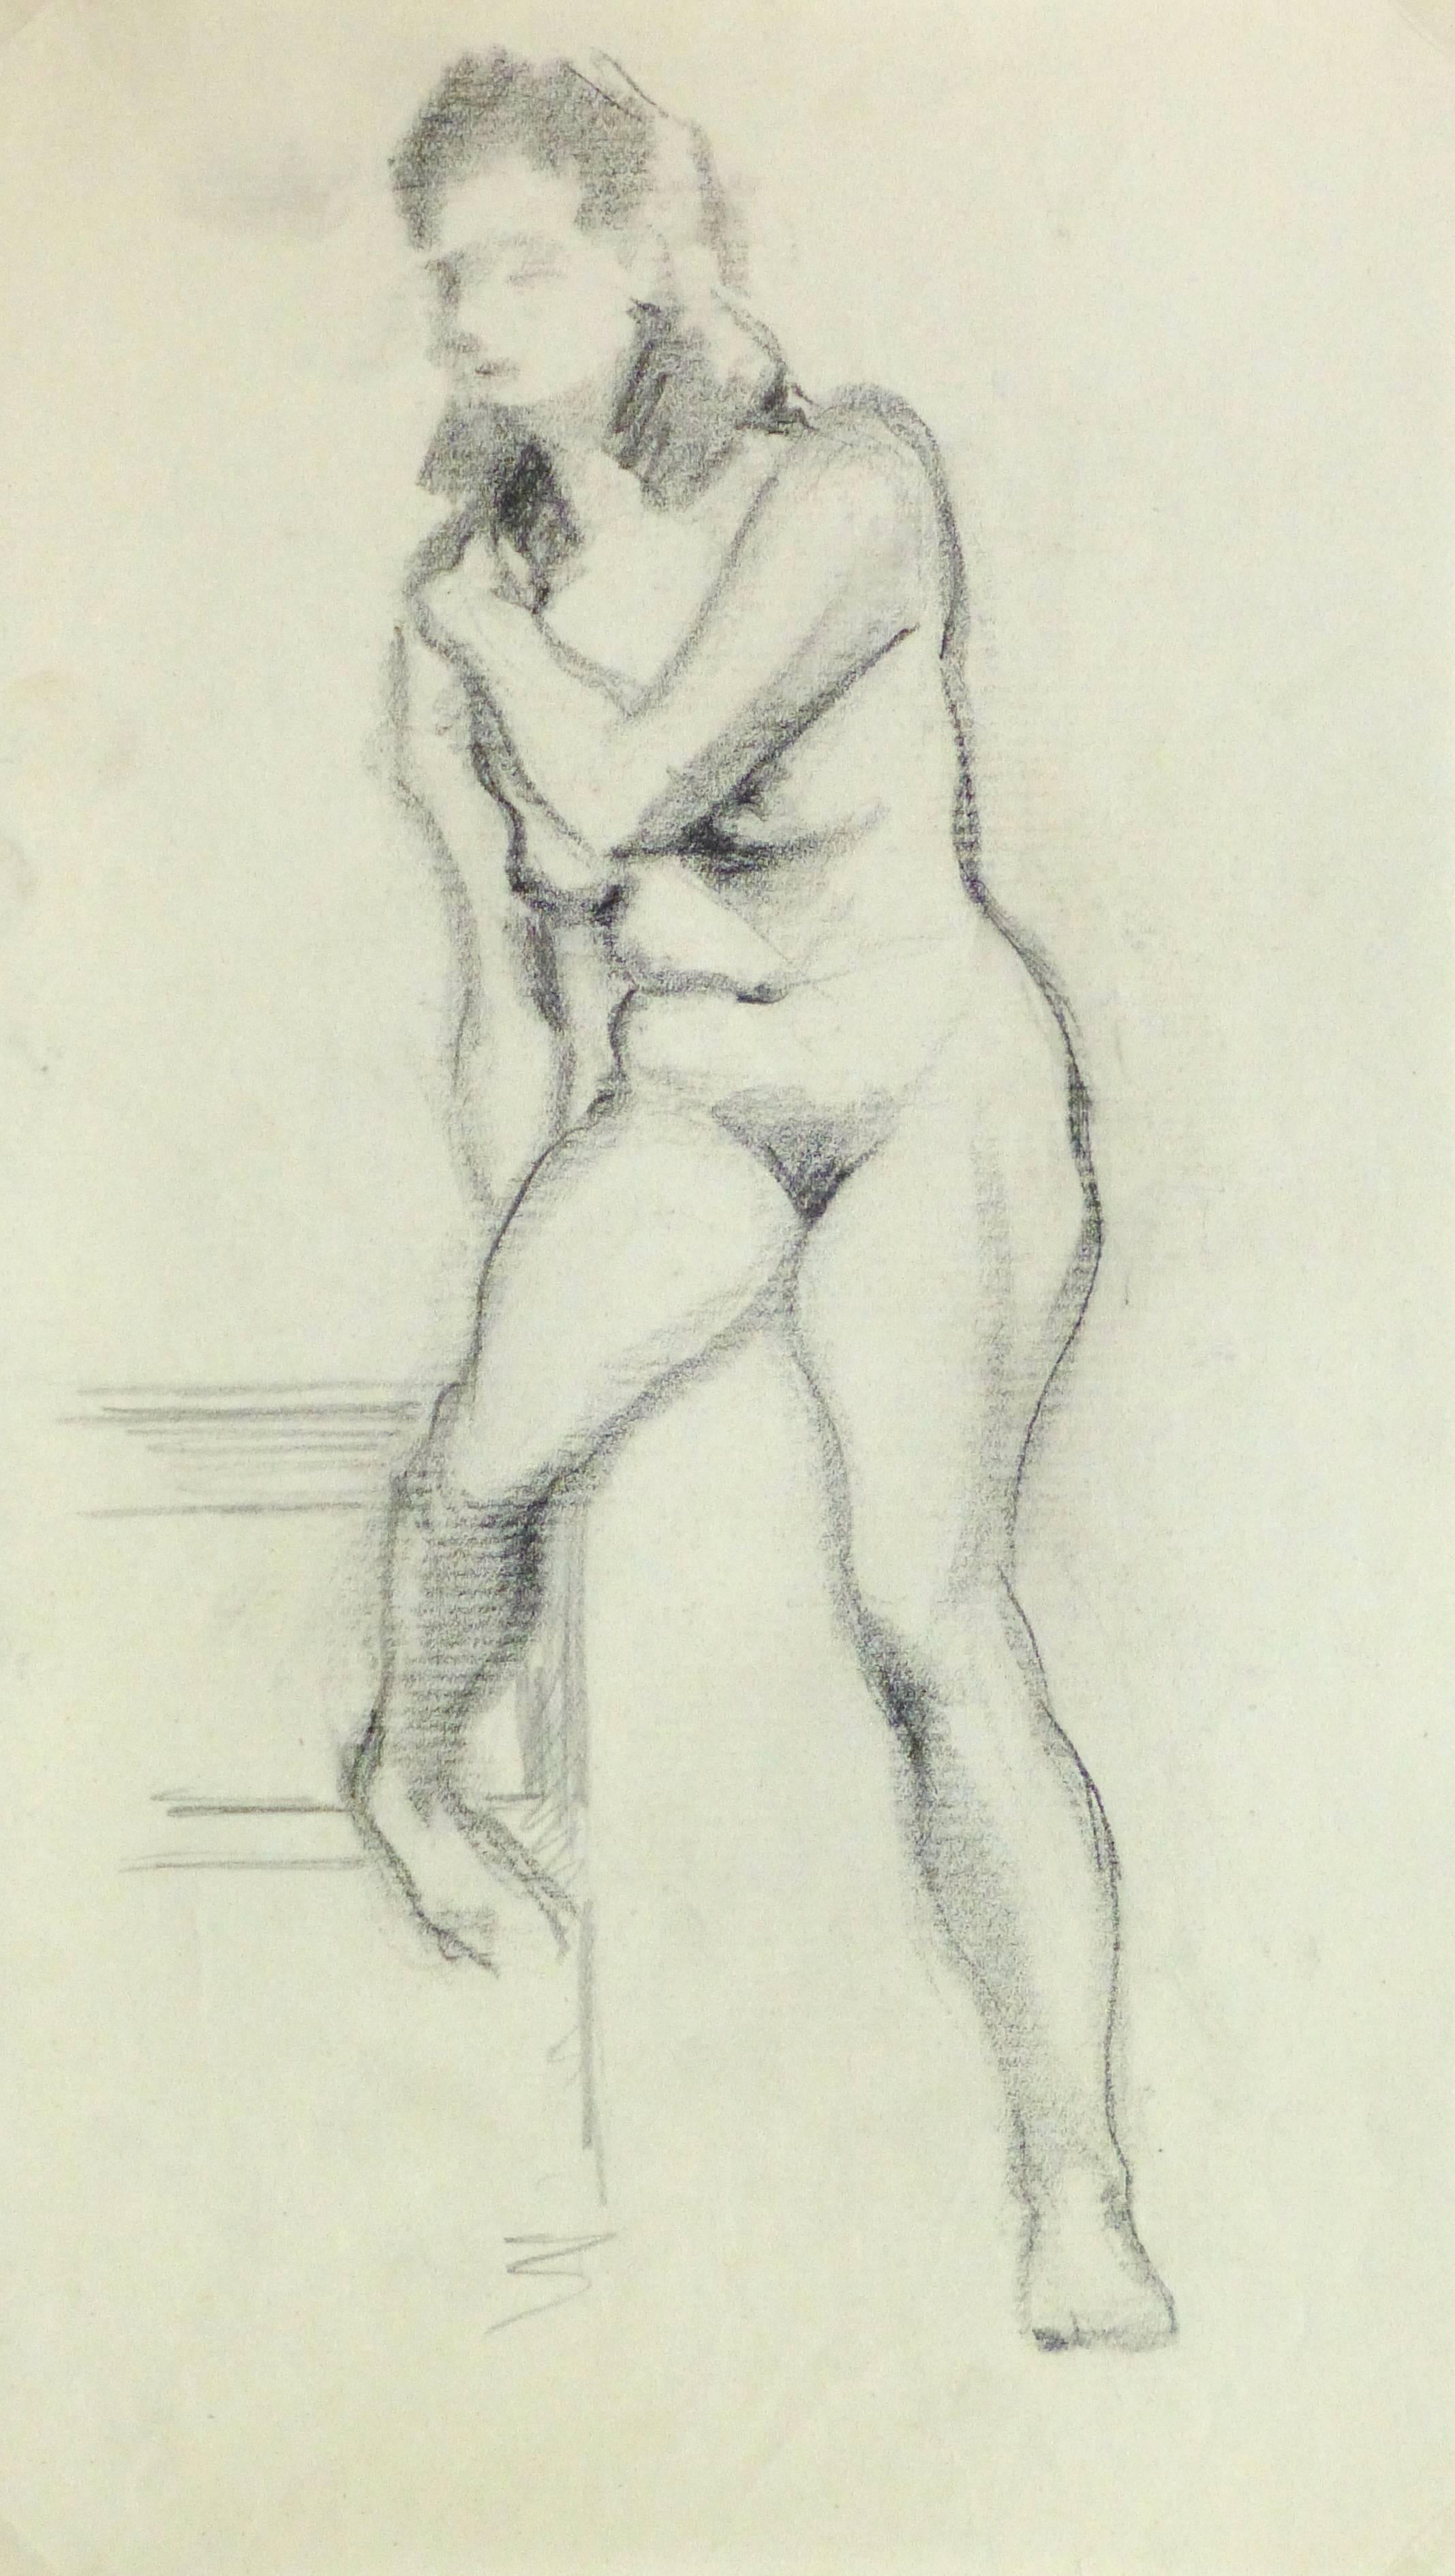 Nude Pencil Sketch - Seated Female - Art by Jean Ernst